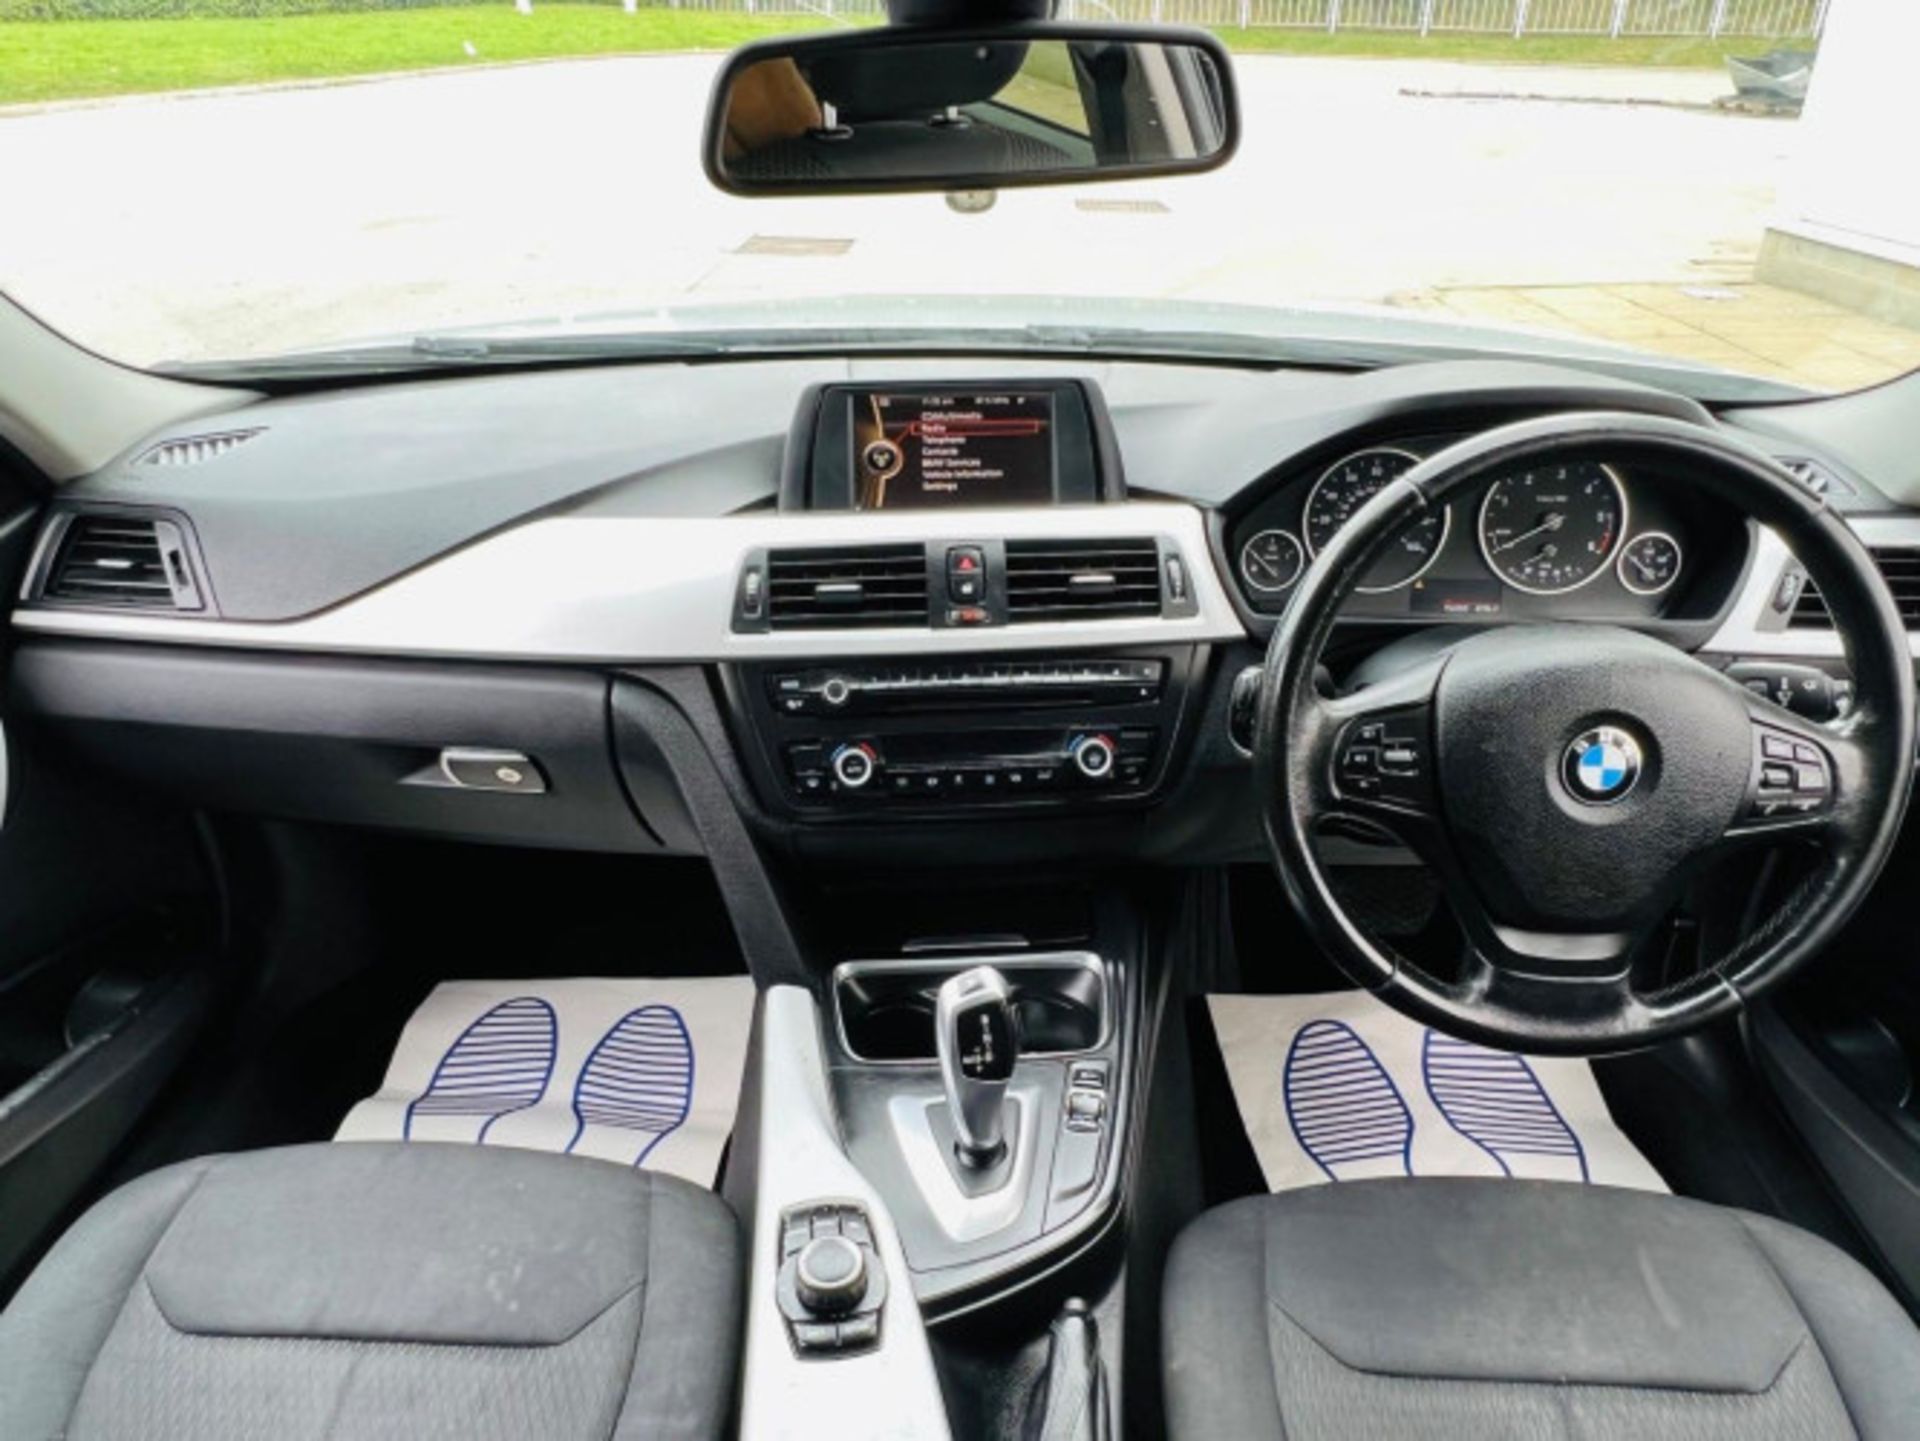 BMW 3 SERIES 2.0 DIESEL ED START STOP - A WELL-MAINTAINED GEM >>--NO VAT ON HAMMER--<< - Image 160 of 229